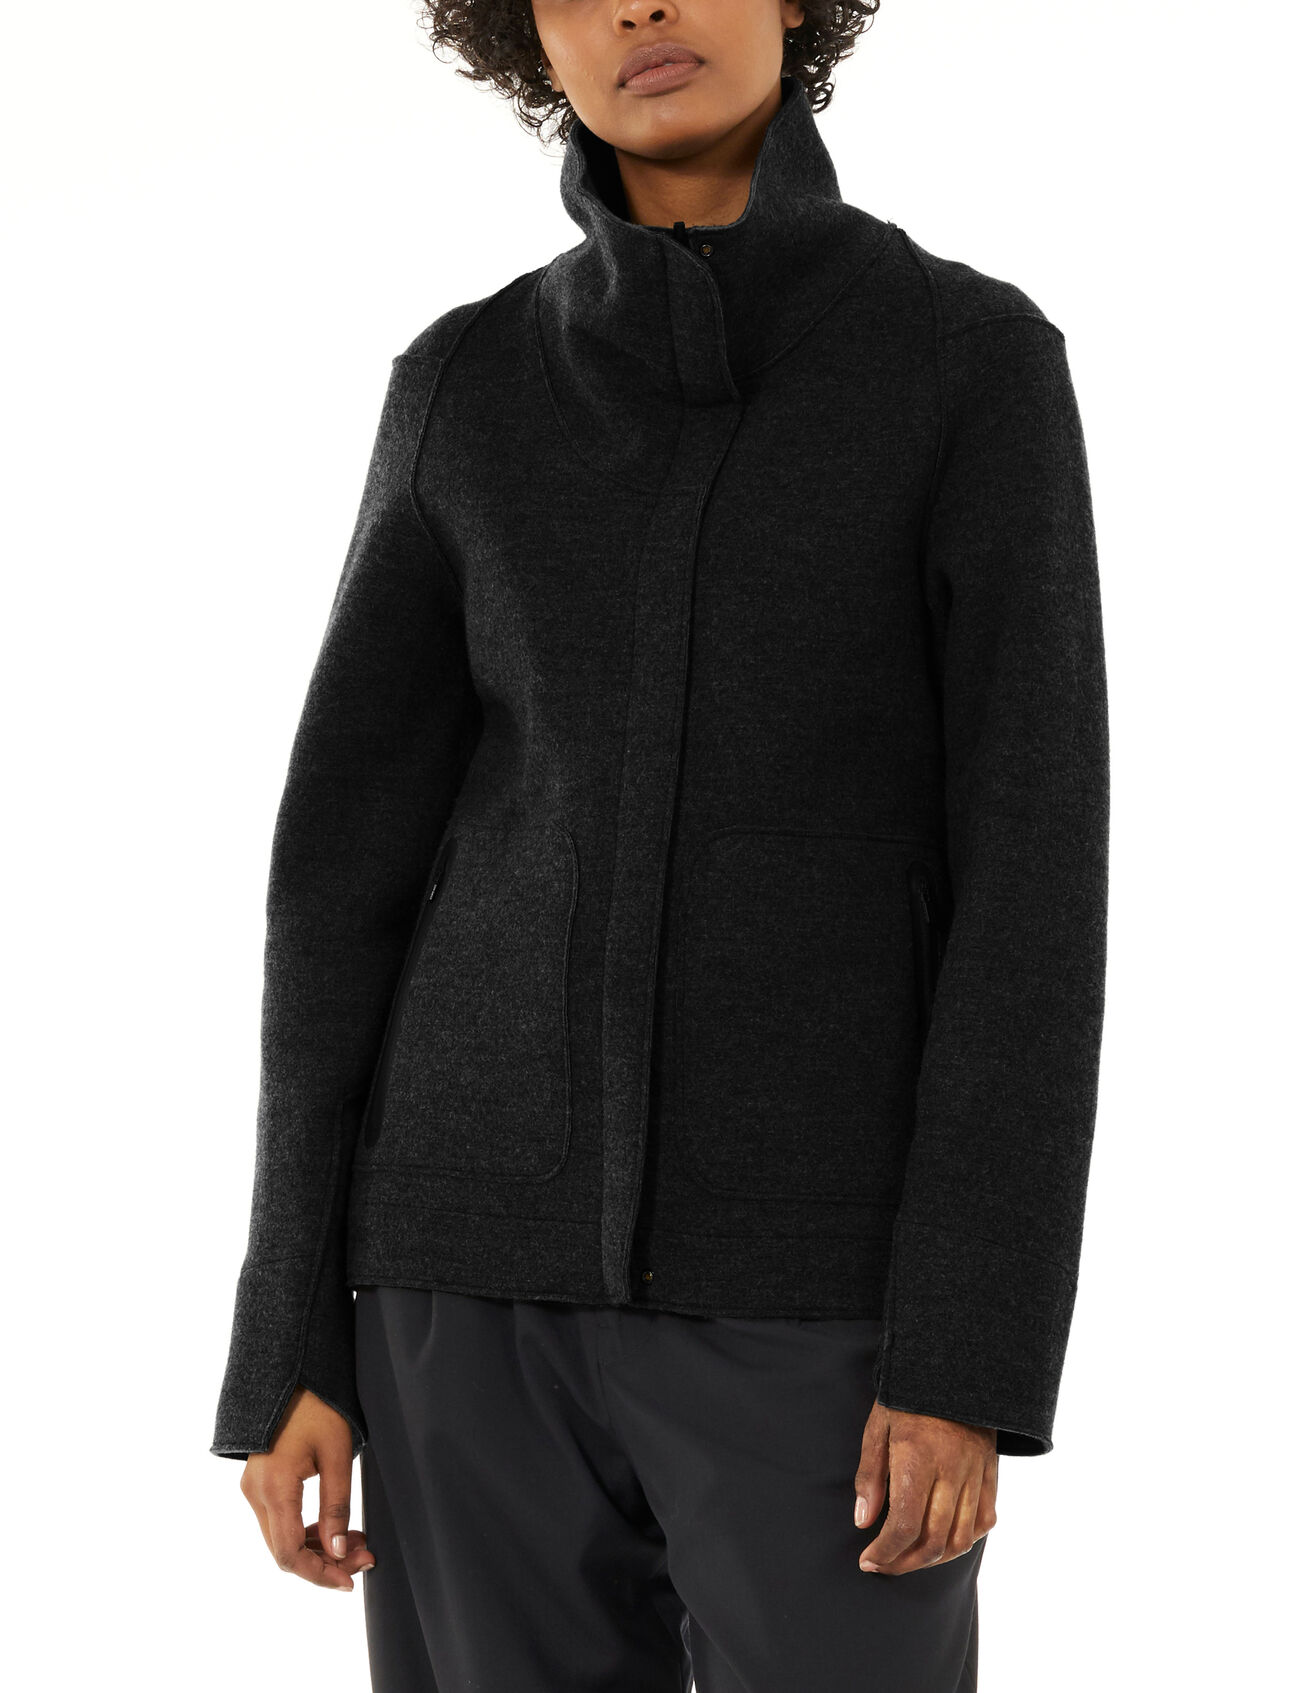 Womens Merino Oak Jacket A sustainable and stylish everyday jacket, the Oak Jacket features felted merino wool with a relaxed, modern silhouette.